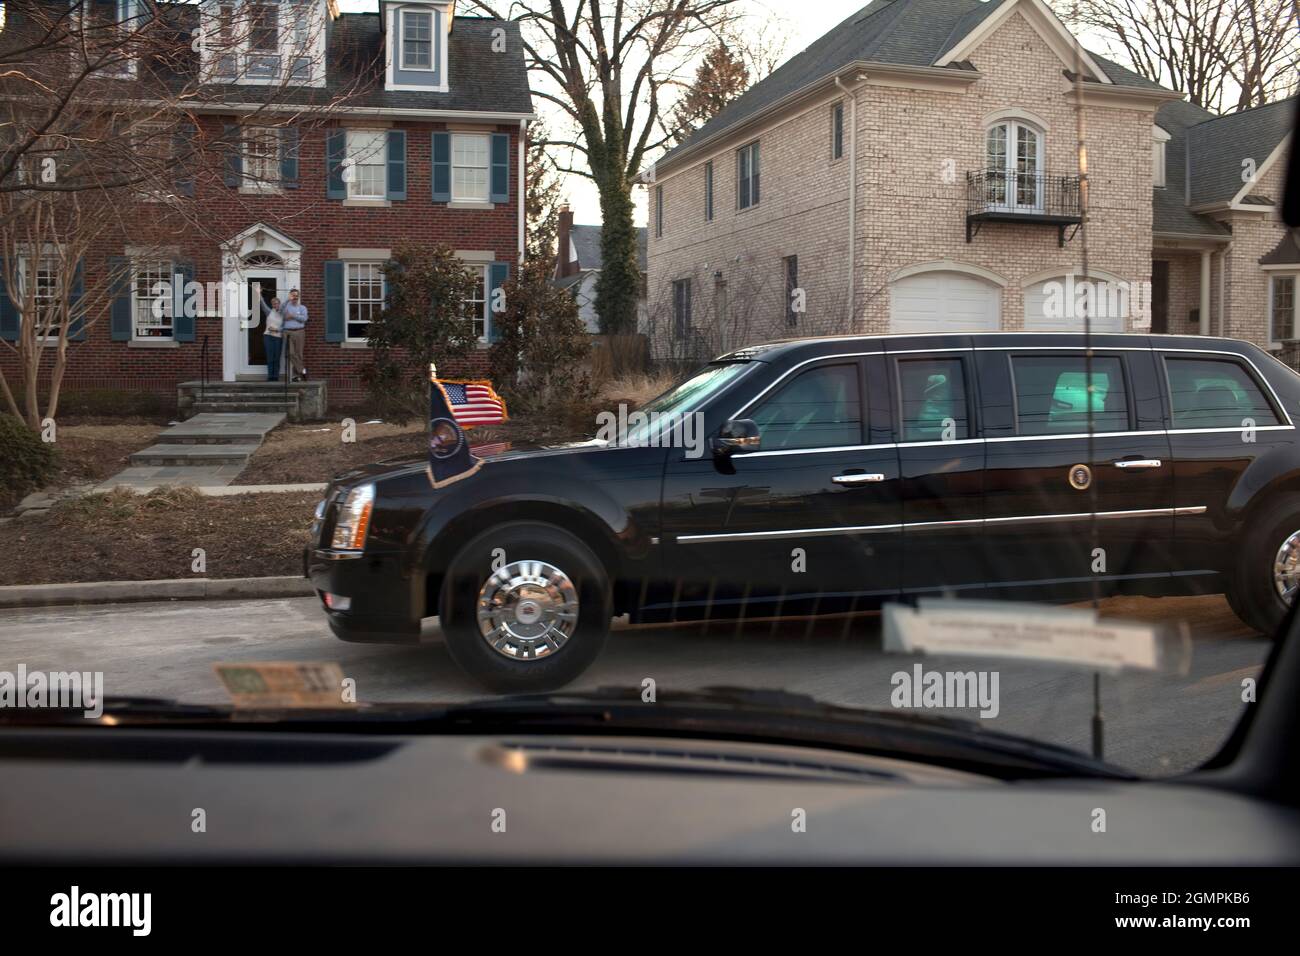 President Barack Obama and First Lady Michelle Obama ride in the presidential limousine on the way to attending a parent teacher meeting 3/6/09. Official White House Photo by Pete Souza Stock Photo